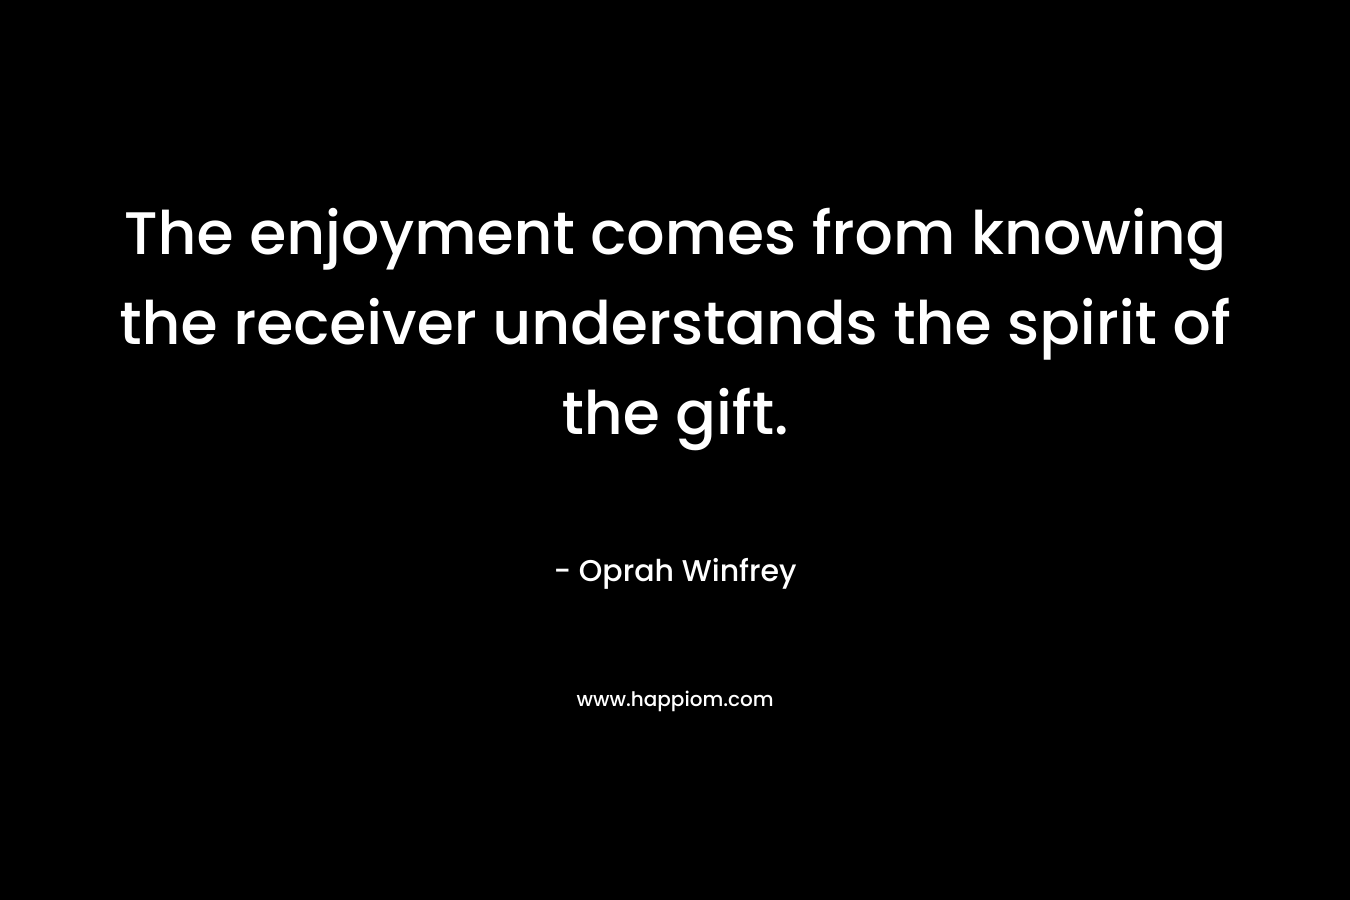 The enjoyment comes from knowing the receiver understands the spirit of the gift. – Oprah Winfrey